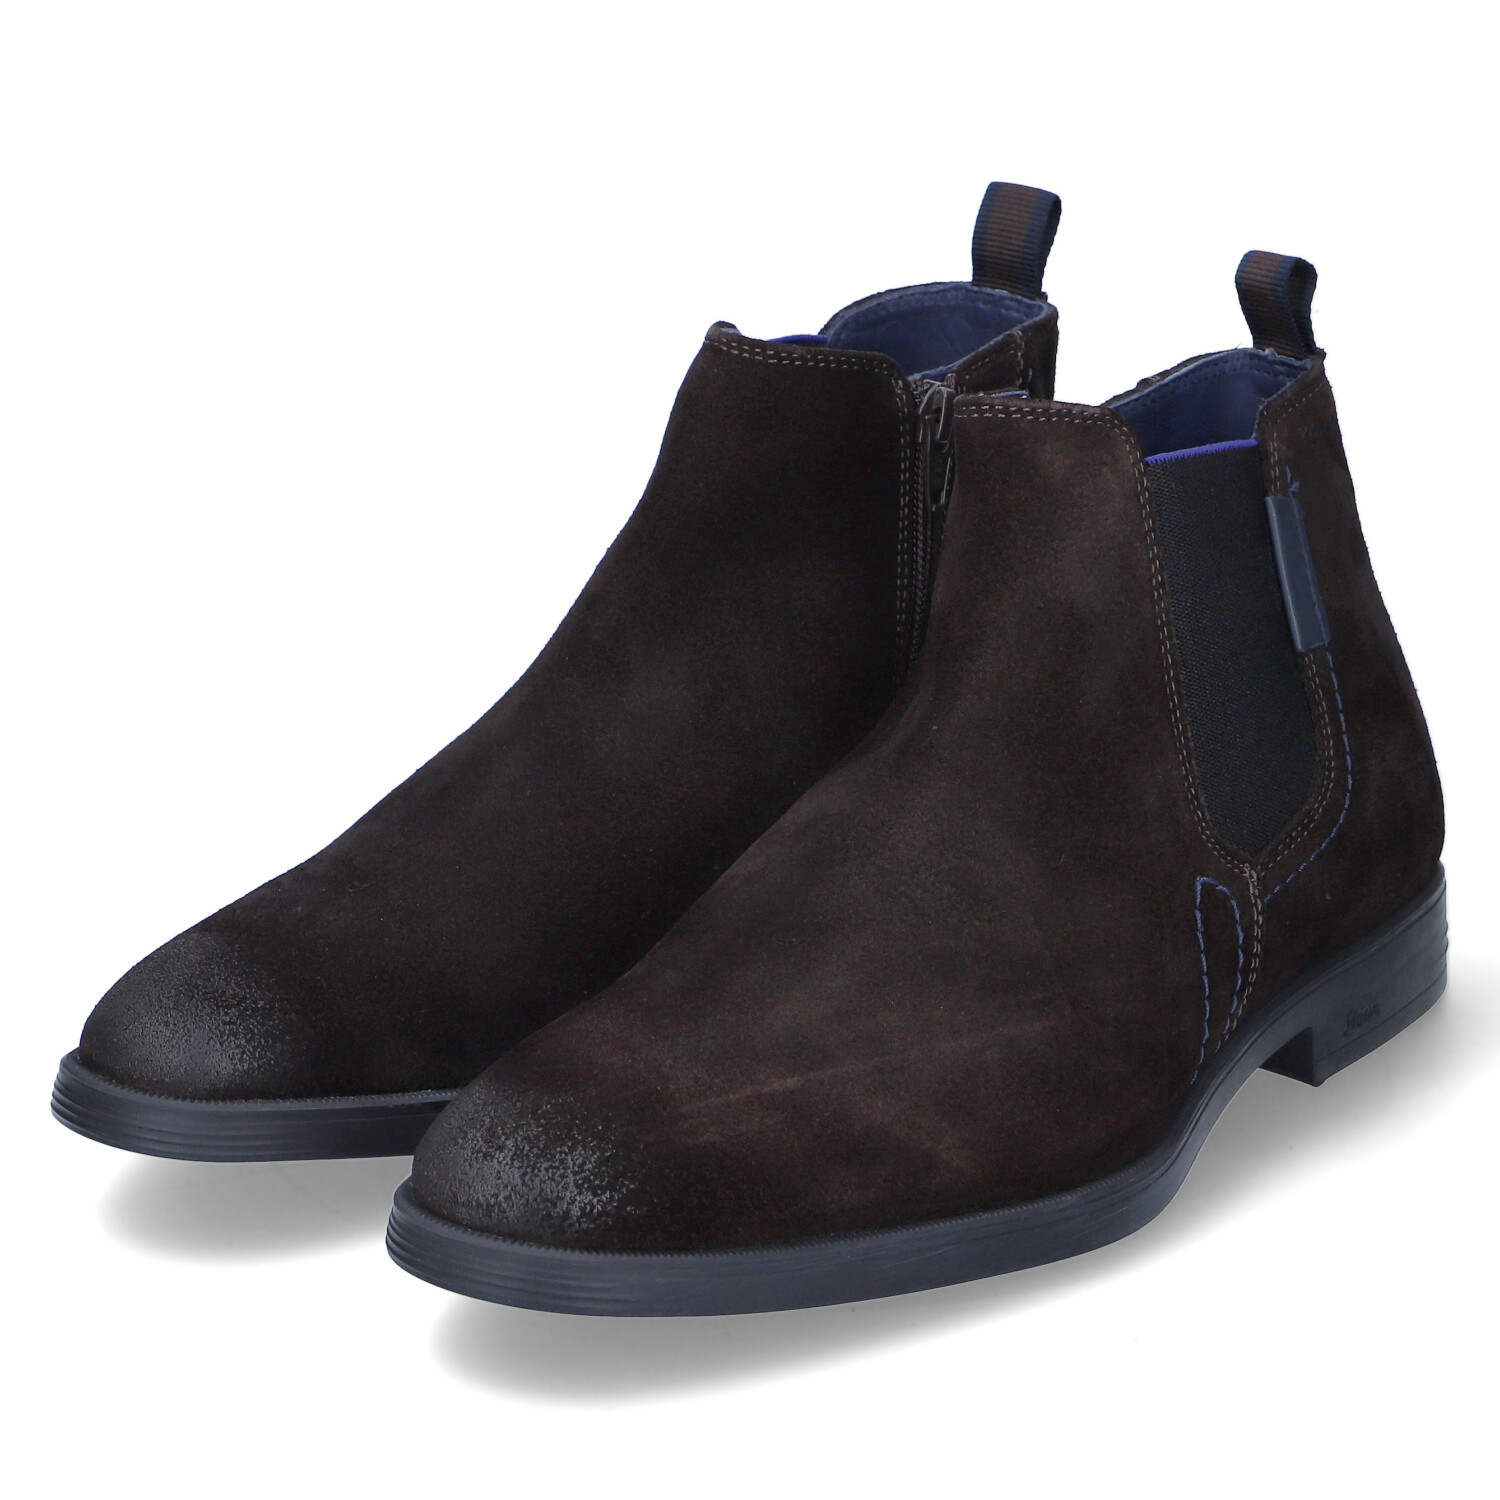 Сапоги Sioux Chelsea Boots FORIOLO, коричневый